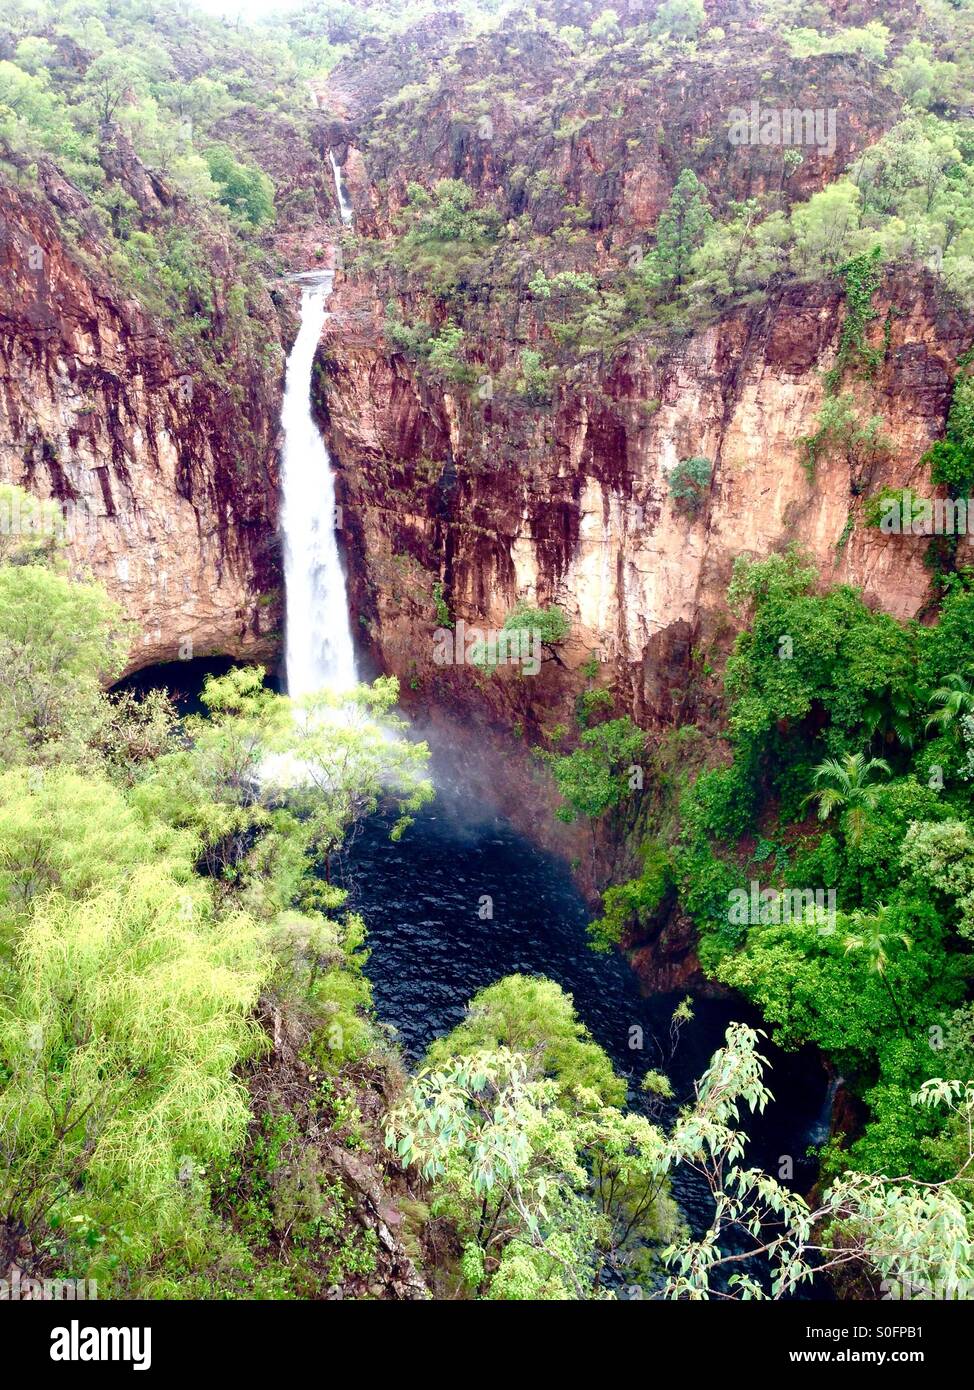 During a trip to Darwin, we managed to find a beautiful outlook in Litchfield National Park to snap this gorgeous waterfall! Stock Photo